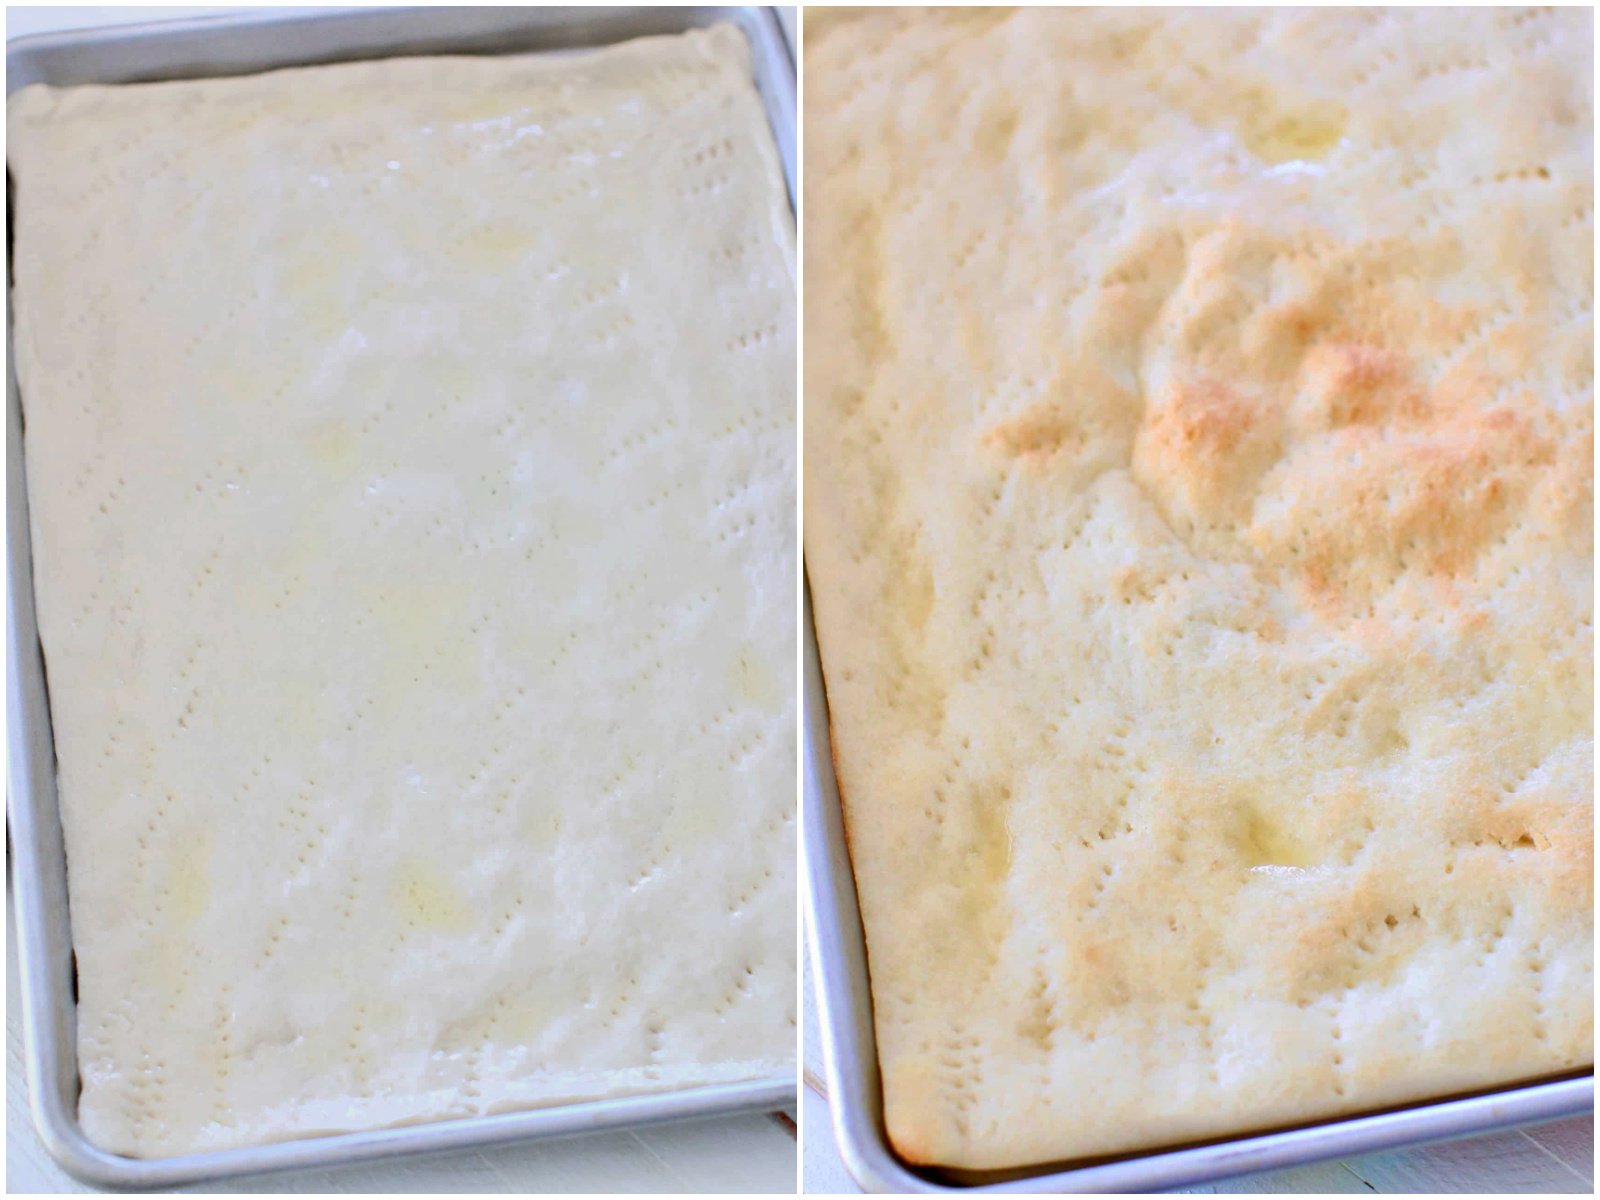 collage of two photos: pizza dough spread out on a rectangle baking sheet; partially baked pizza crust on a baking tray.